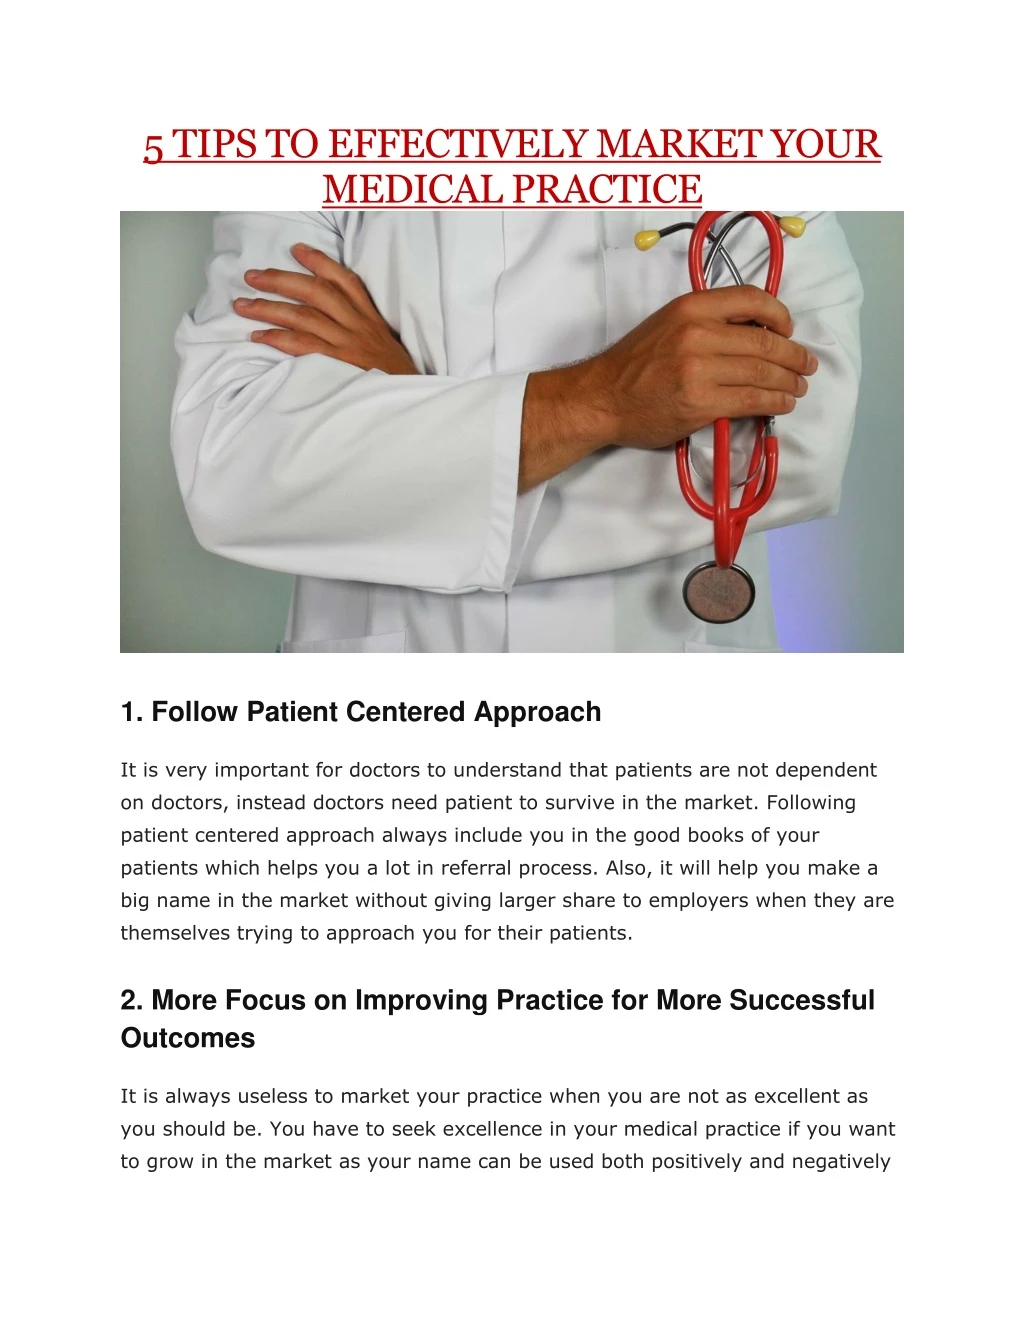 5 tips to effectively market your medical practice